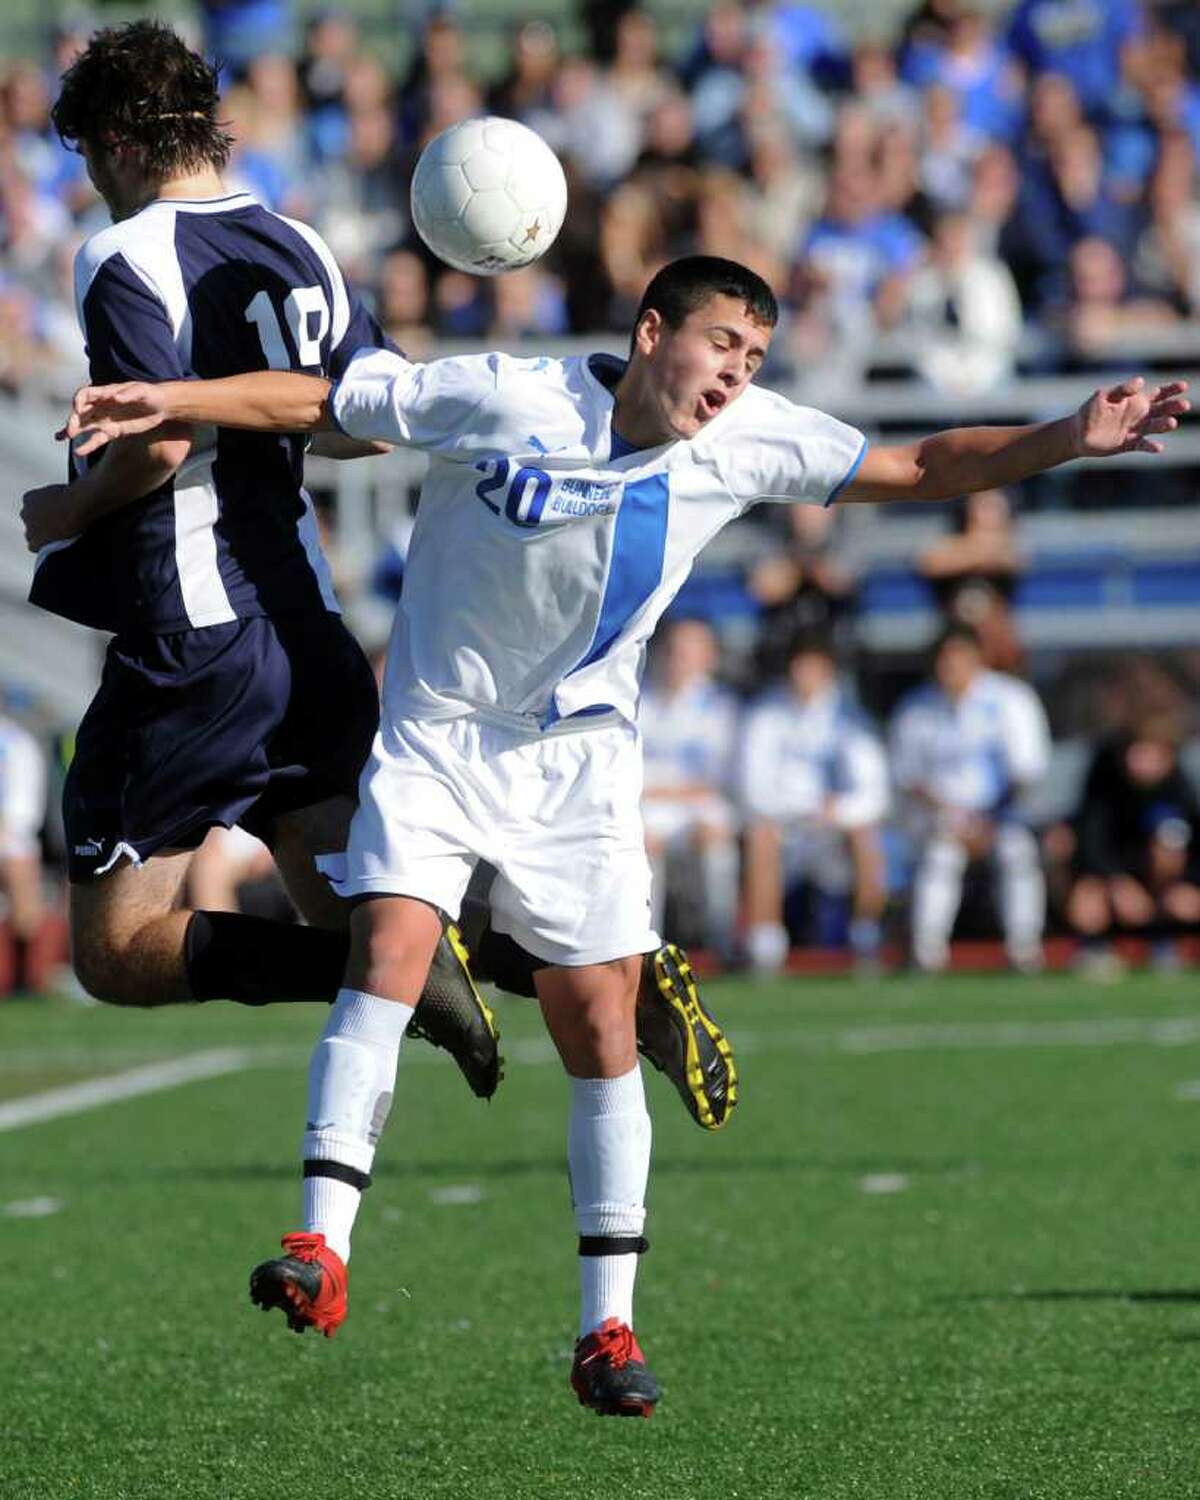 Bunnell's Christopher Carneiro in action against Avon's Max Leopold during the Class L boys state championship game, in Middletown, Conn. Nov. 26th, 2011. Bunnell defeated Avon 3-0.